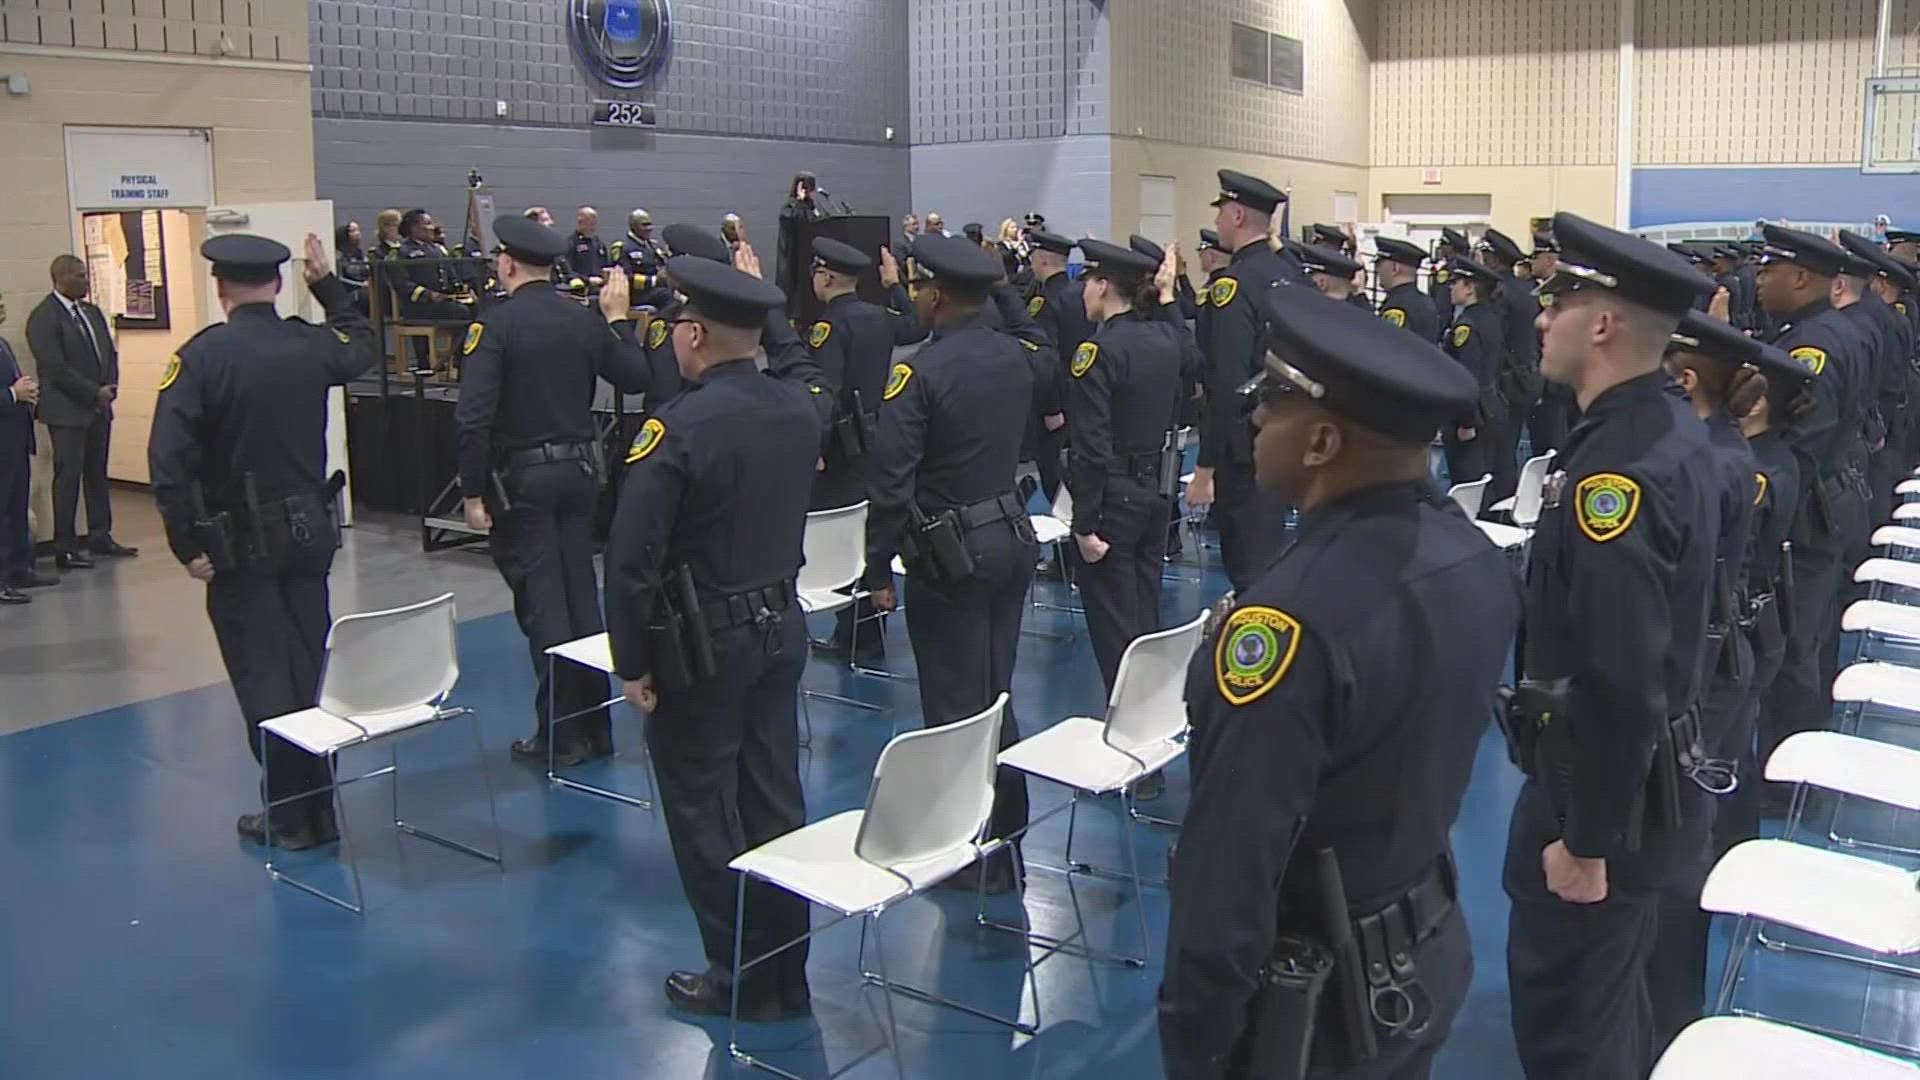 On Thursday, 61 cadets were sworn in, but HPD is hoping to add many more officers to their force this year.